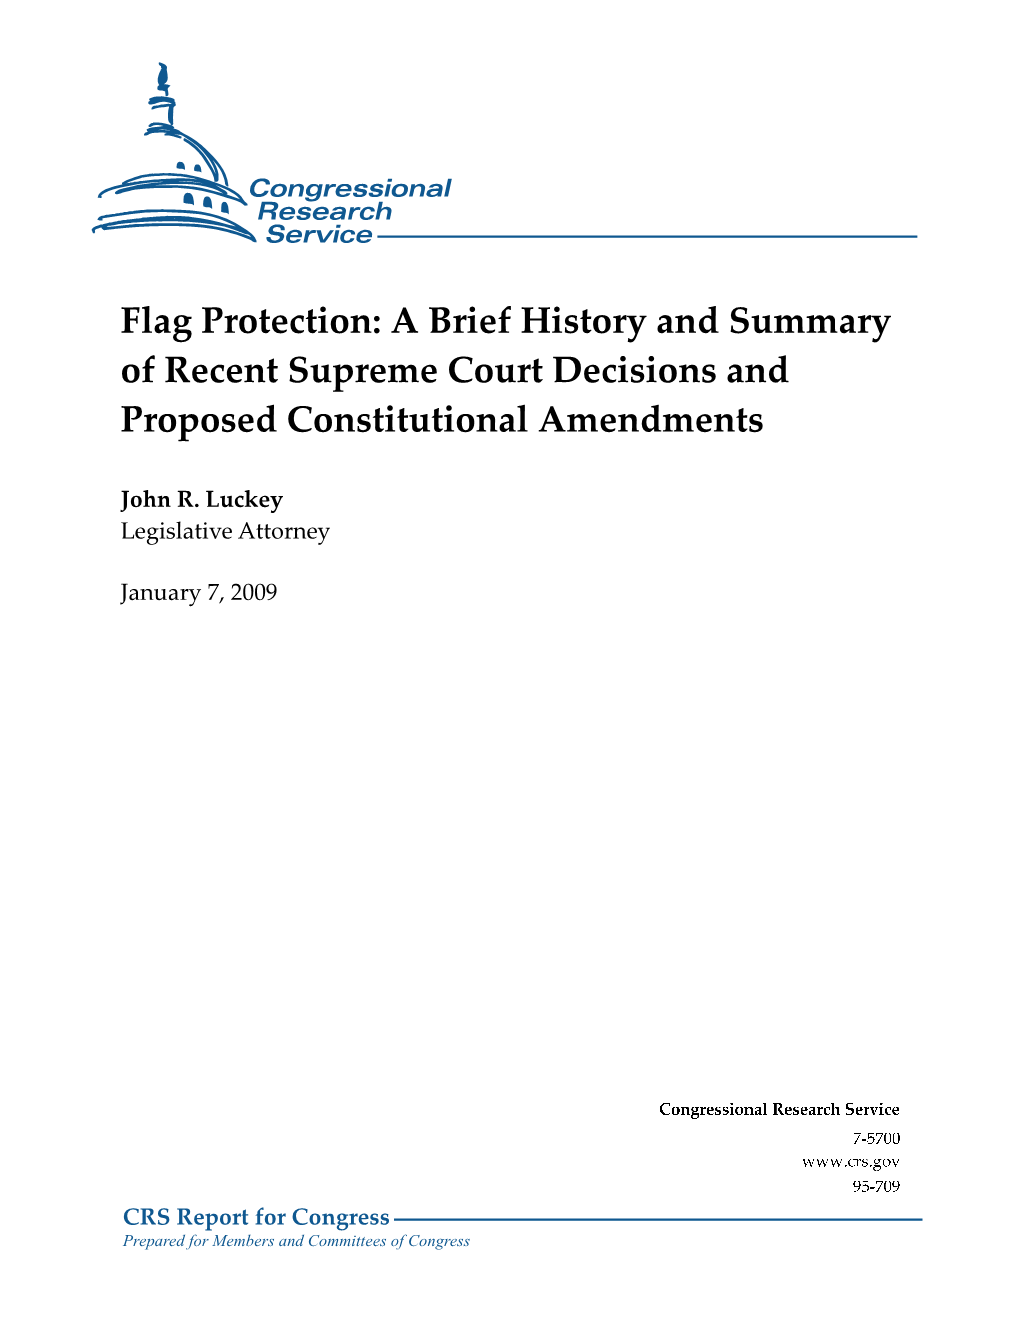 Flag Protection Issue, from the Enactment of the Flag Protection Act in 1968 Through Current Consideration of a Constitutional Amendment